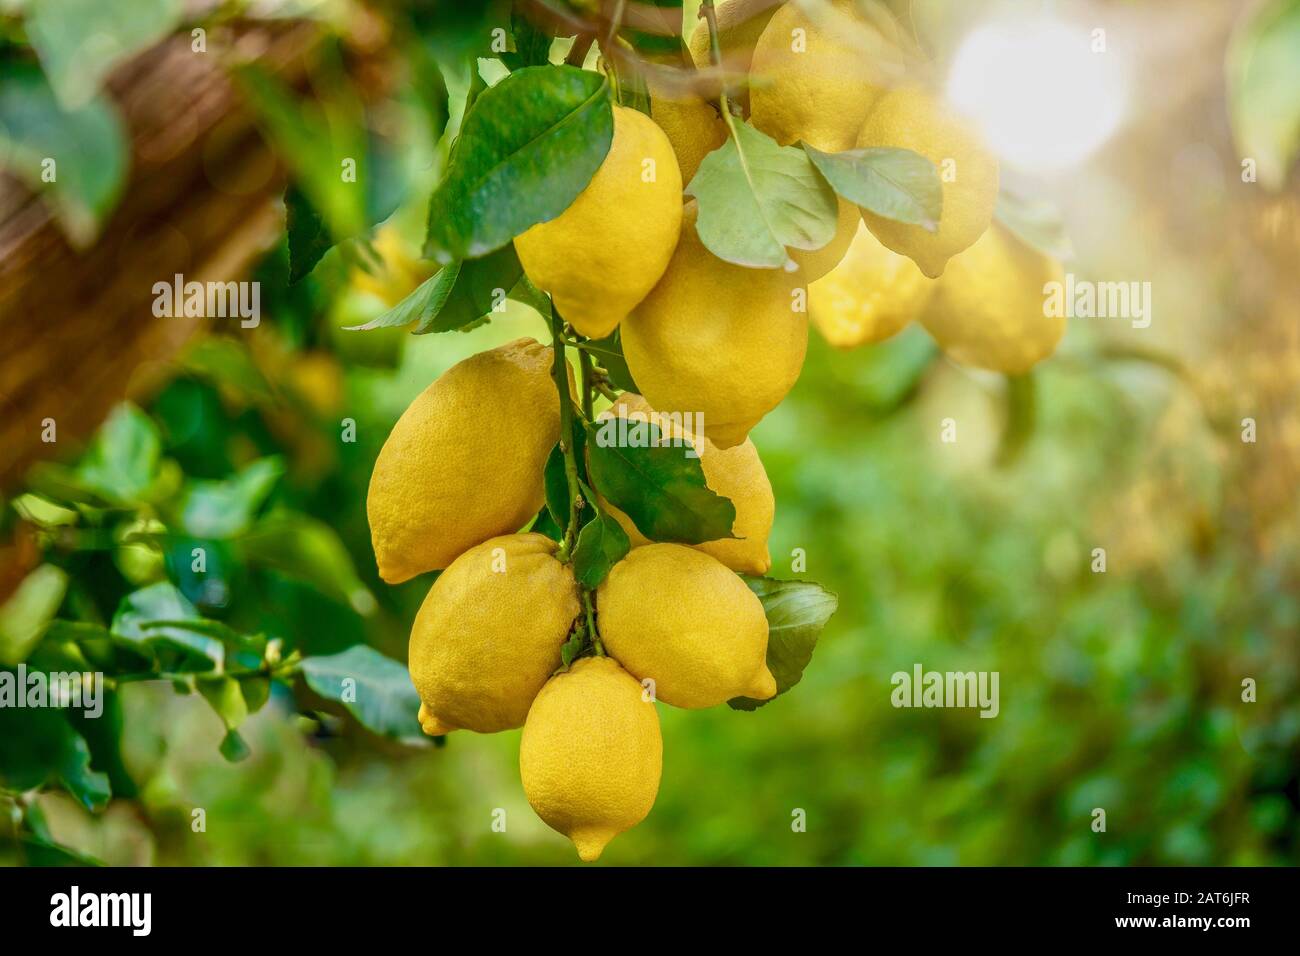 Focus on the lower lemons (Citrus limon) looking healthy and fresh, hanging from a tree in Italy on a summer day, with beautiful background light. Stock Photo